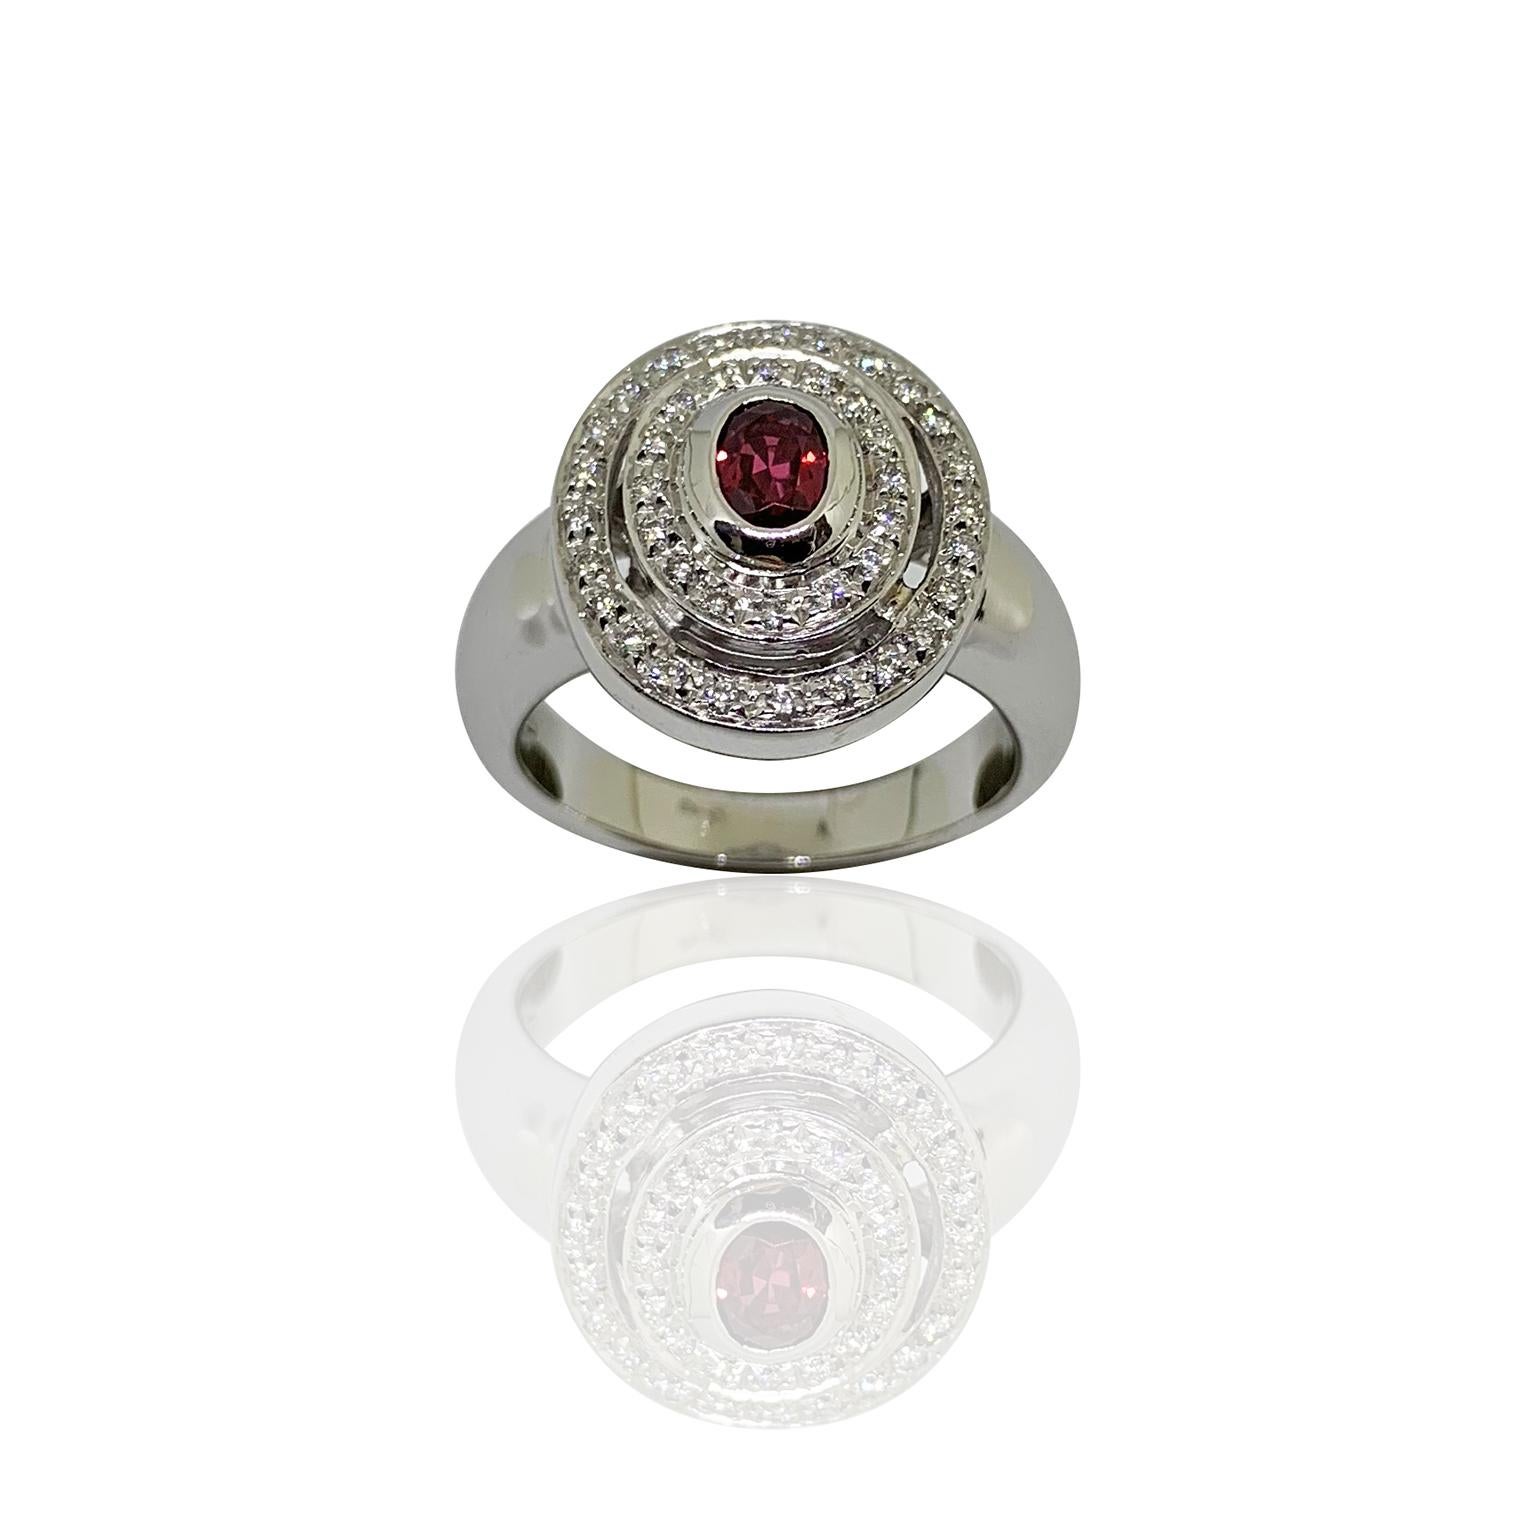 White 18 kt gold ring diamonds and natural ruby round design
Stamp 750
total gold weight 11,50
total diamond weight 0,24
total ruby weight 0,45
usa size 7 1/2